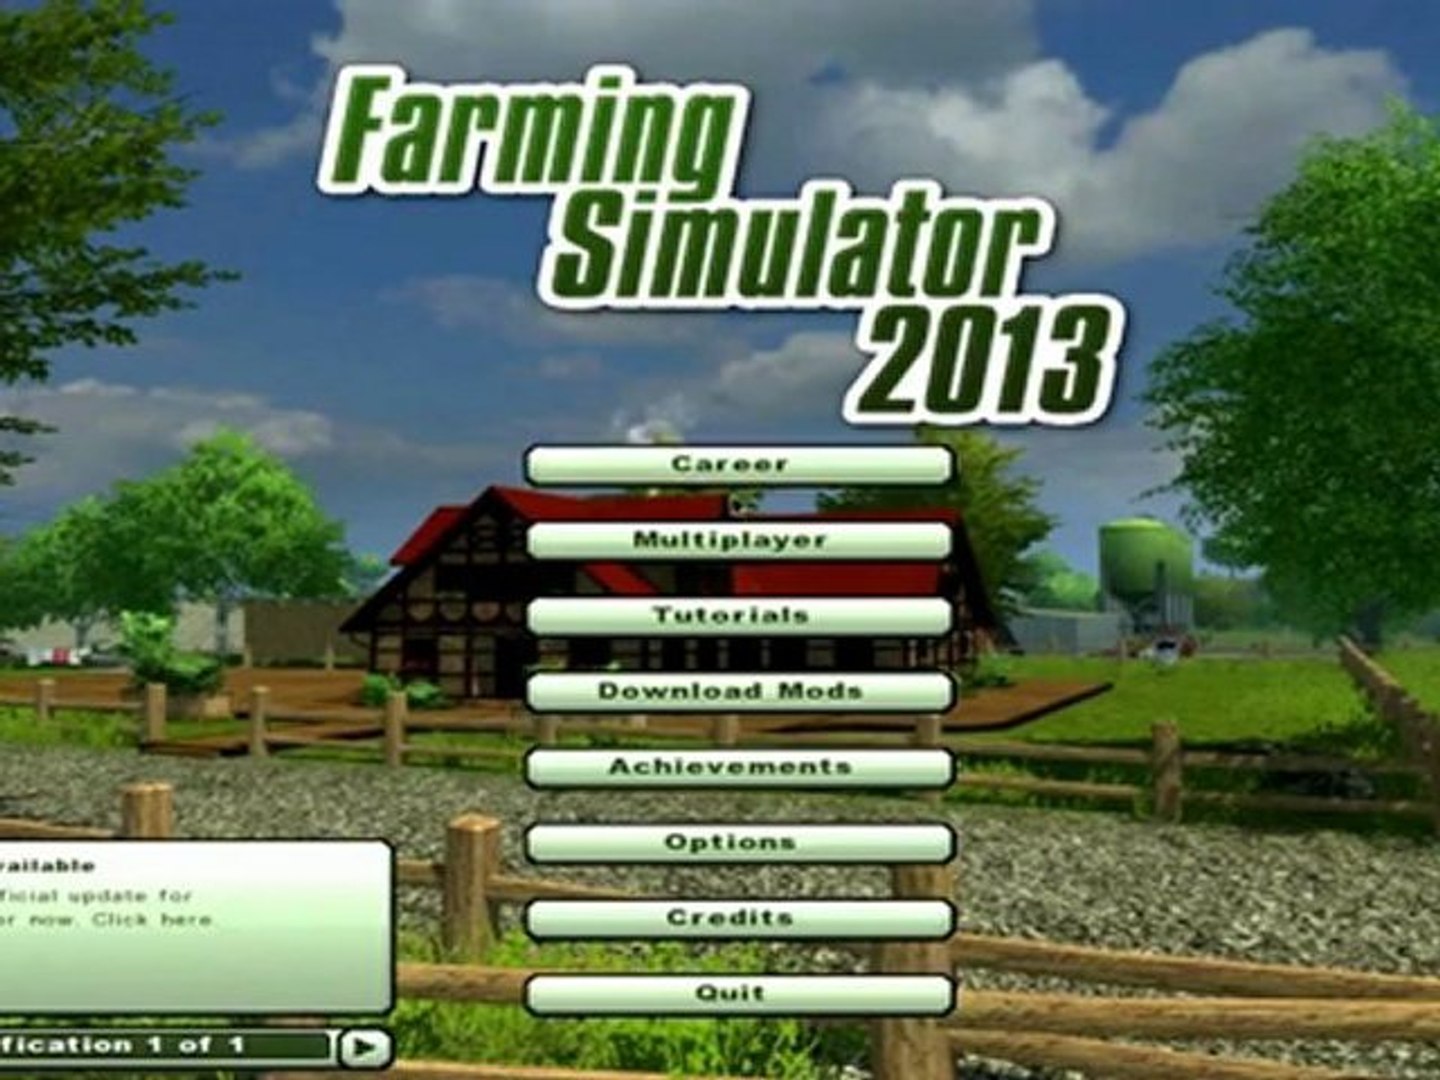 Tutorial #3 Download and Install Farming Simulator 2013 for Free - video  Dailymotion